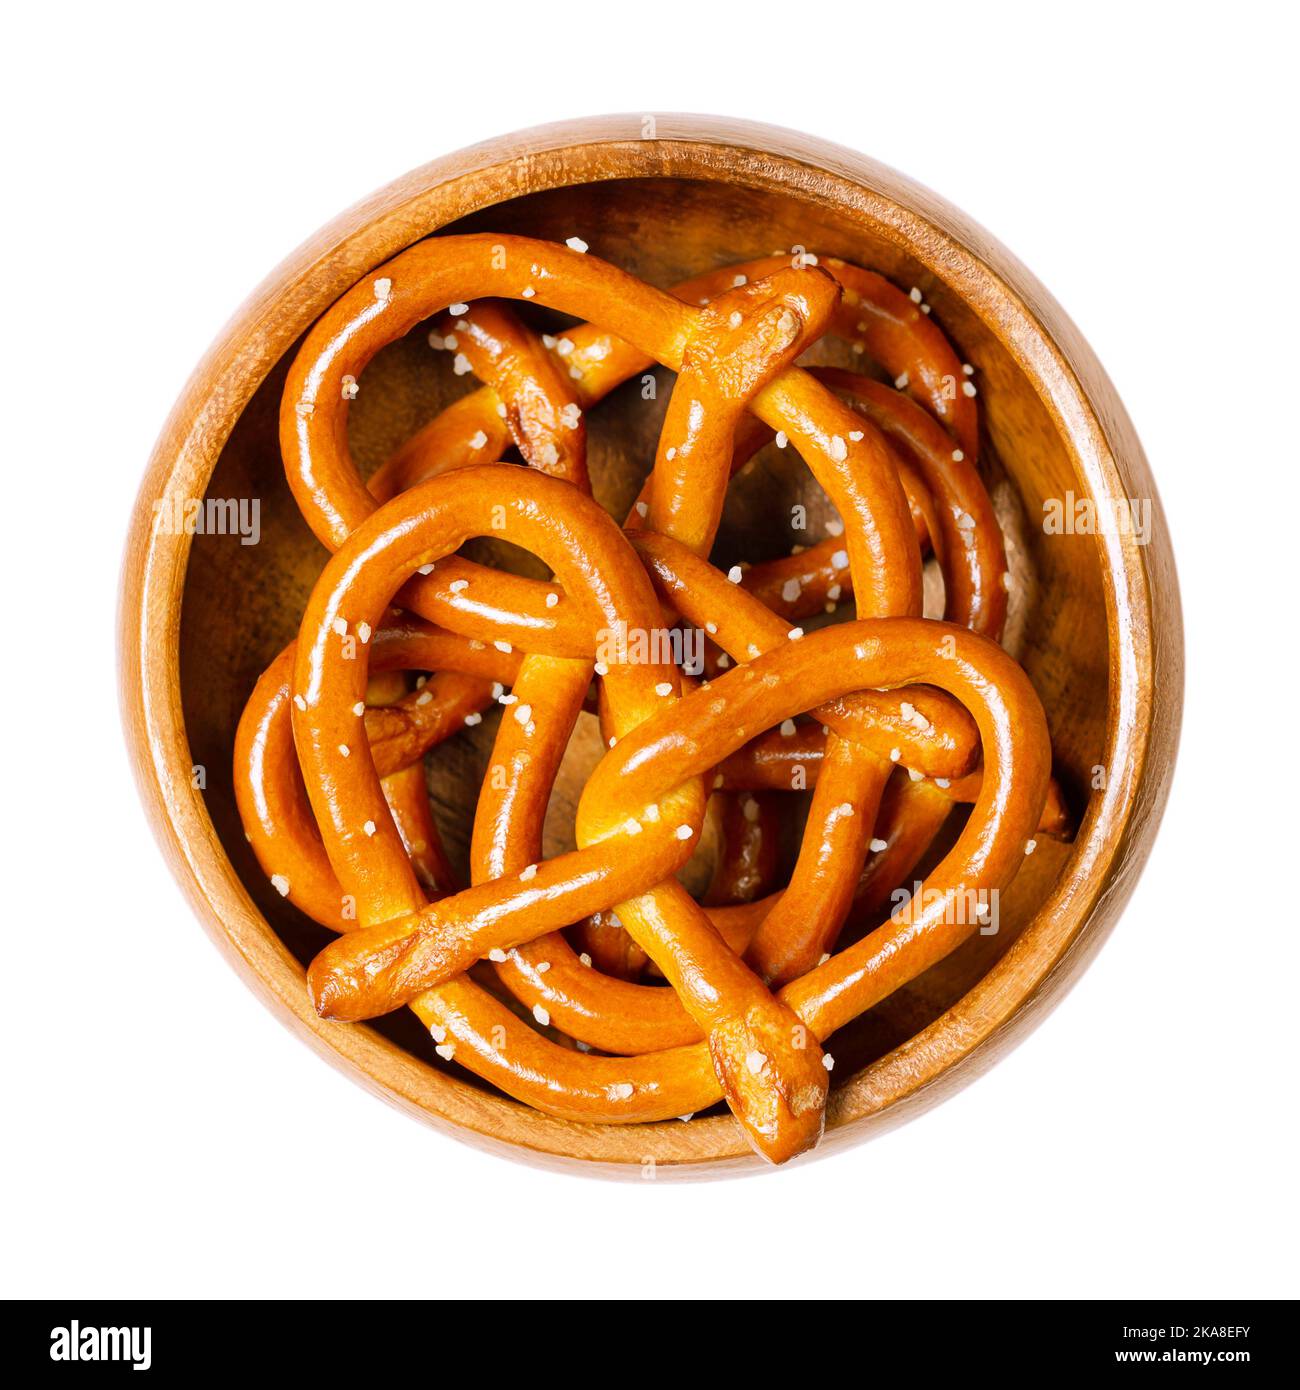 Salted hard small pretzels, also known as Brezel, in a wooden bowl. Popular, traditional and crunchy snack. A type of baked bread, made from dough. Stock Photo